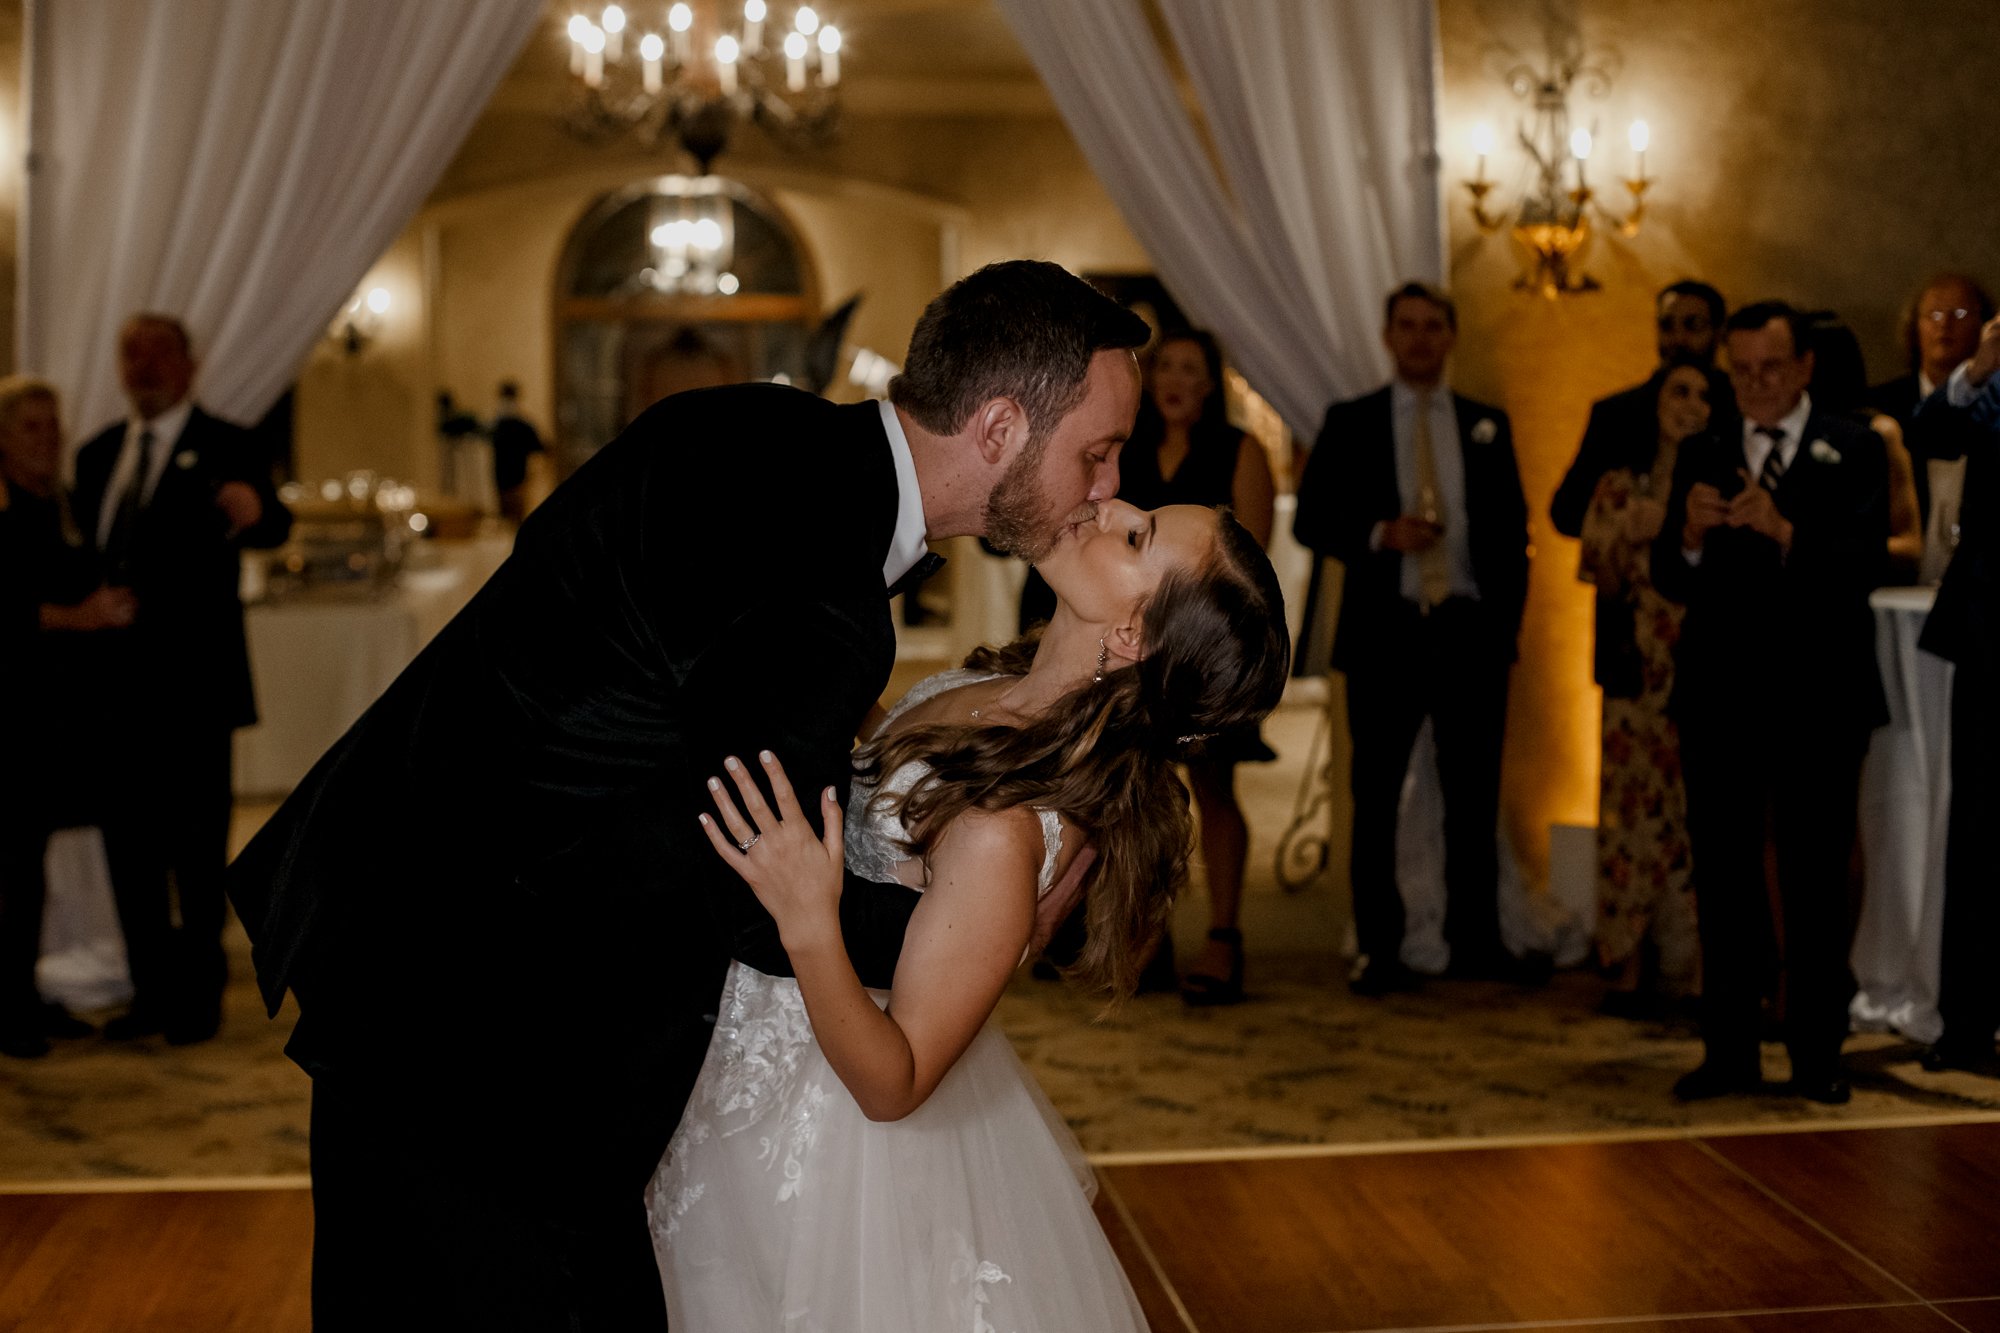 Bride and groom first dance. Wedding reception at Royal Oaks Country Club